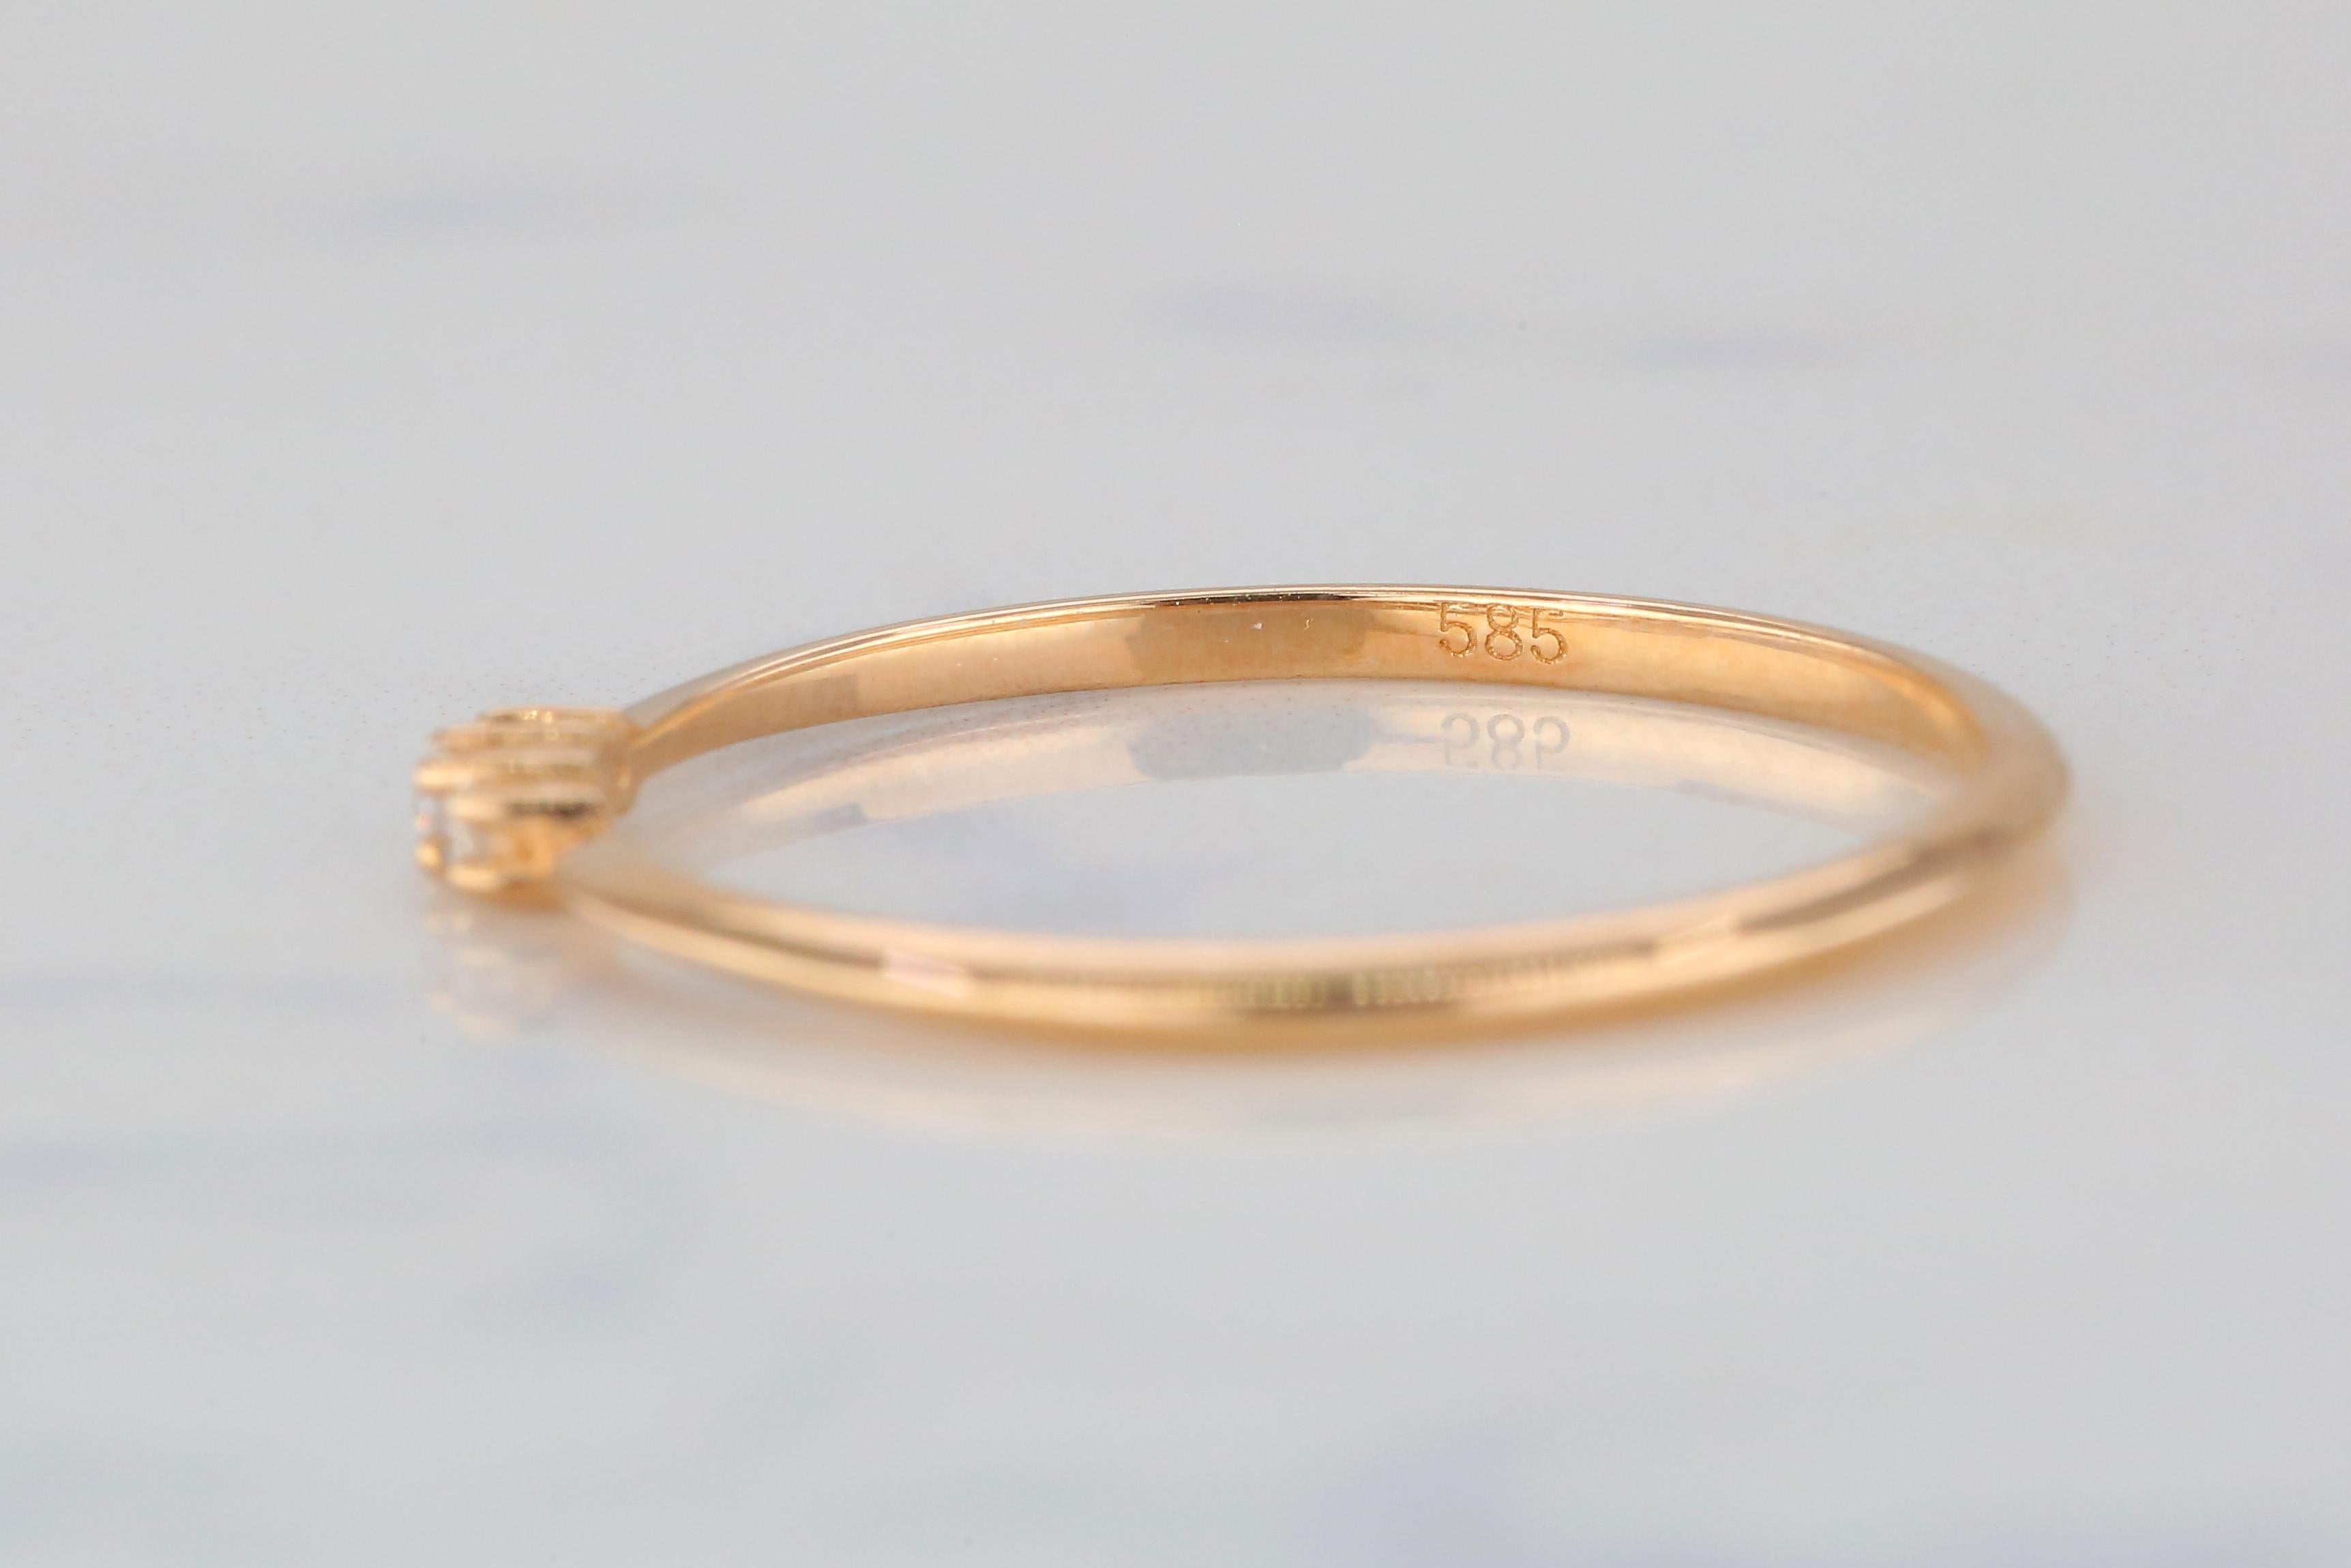 For Sale:  Round Diamond Trio Ring, 14k Solid Gold Ring, Dainty Ring, Minimalist Style Ring 6